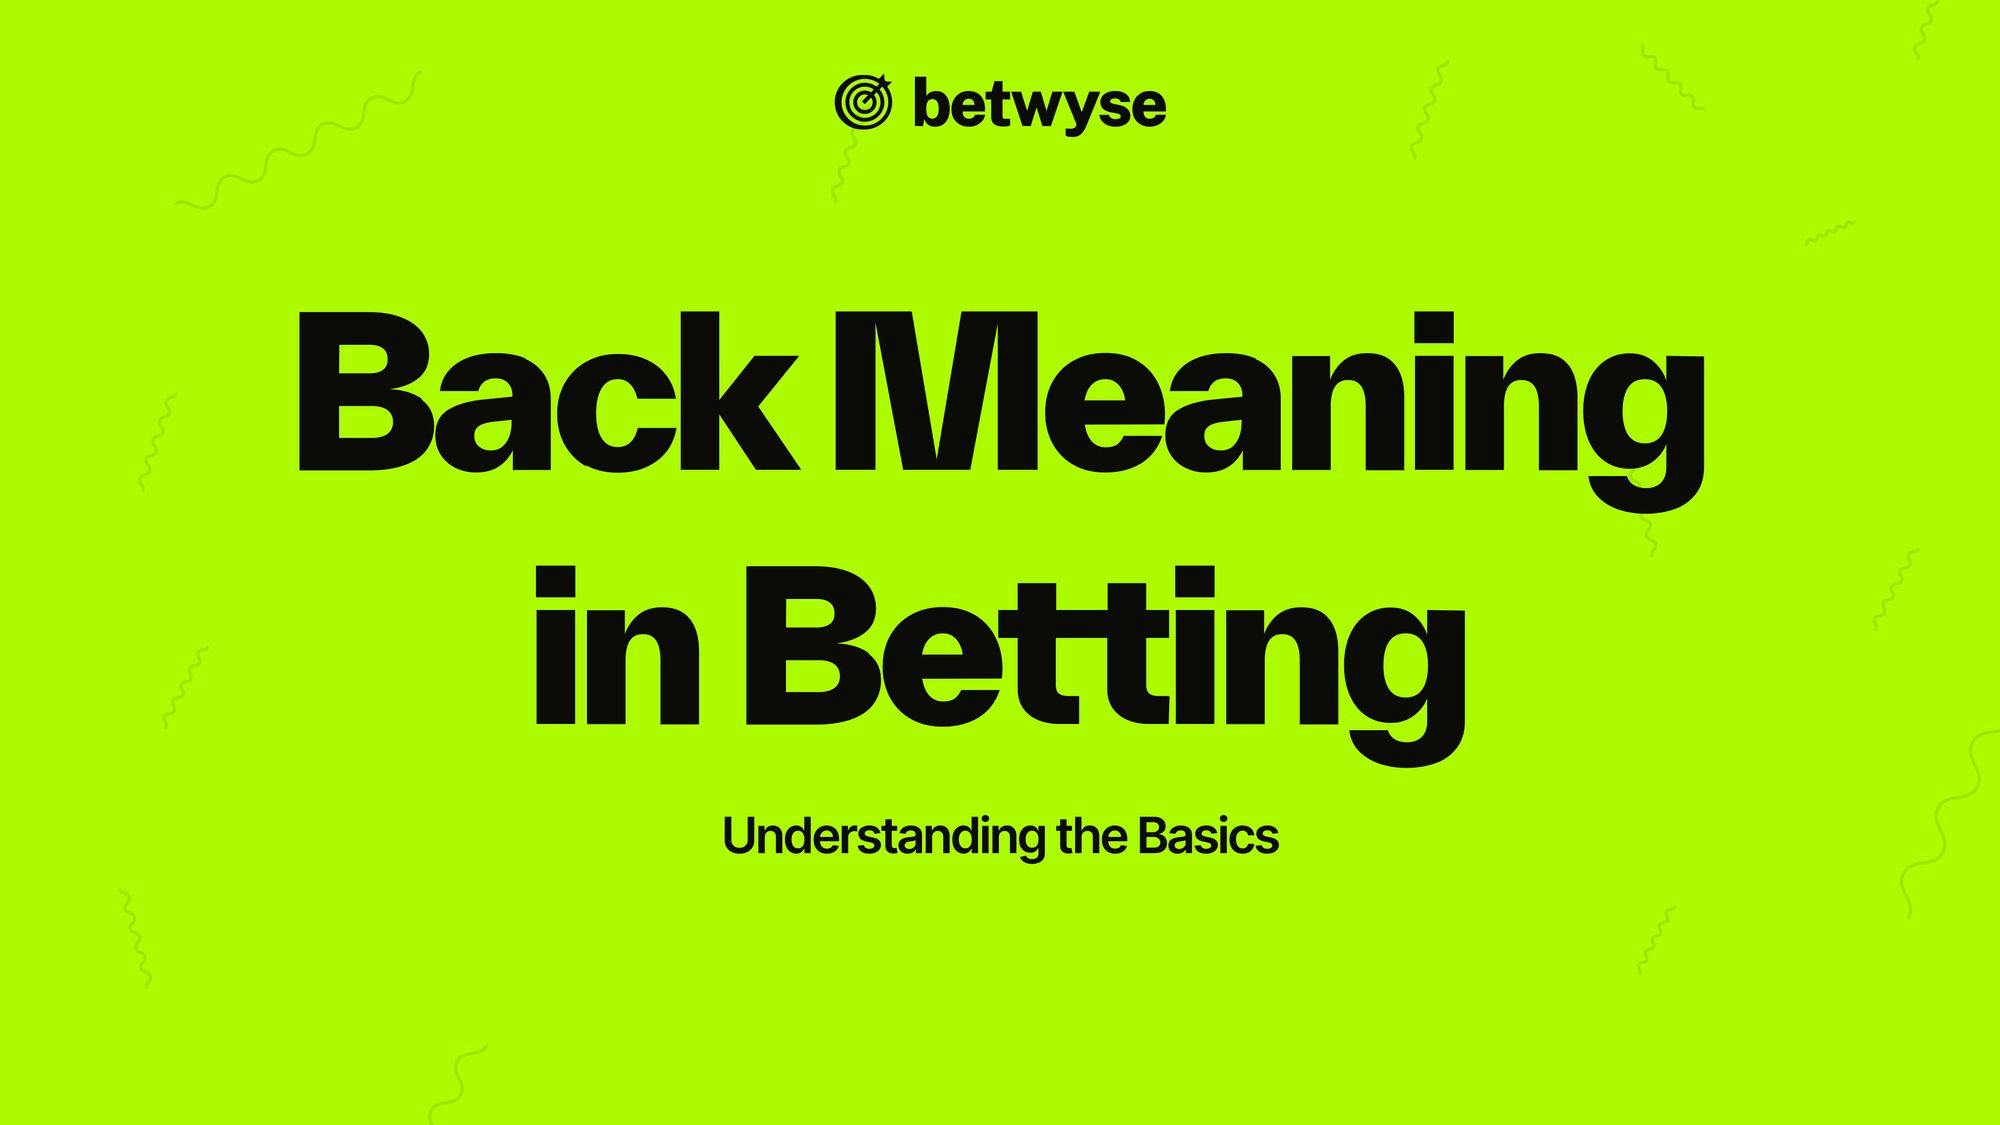 back meaning in betting image